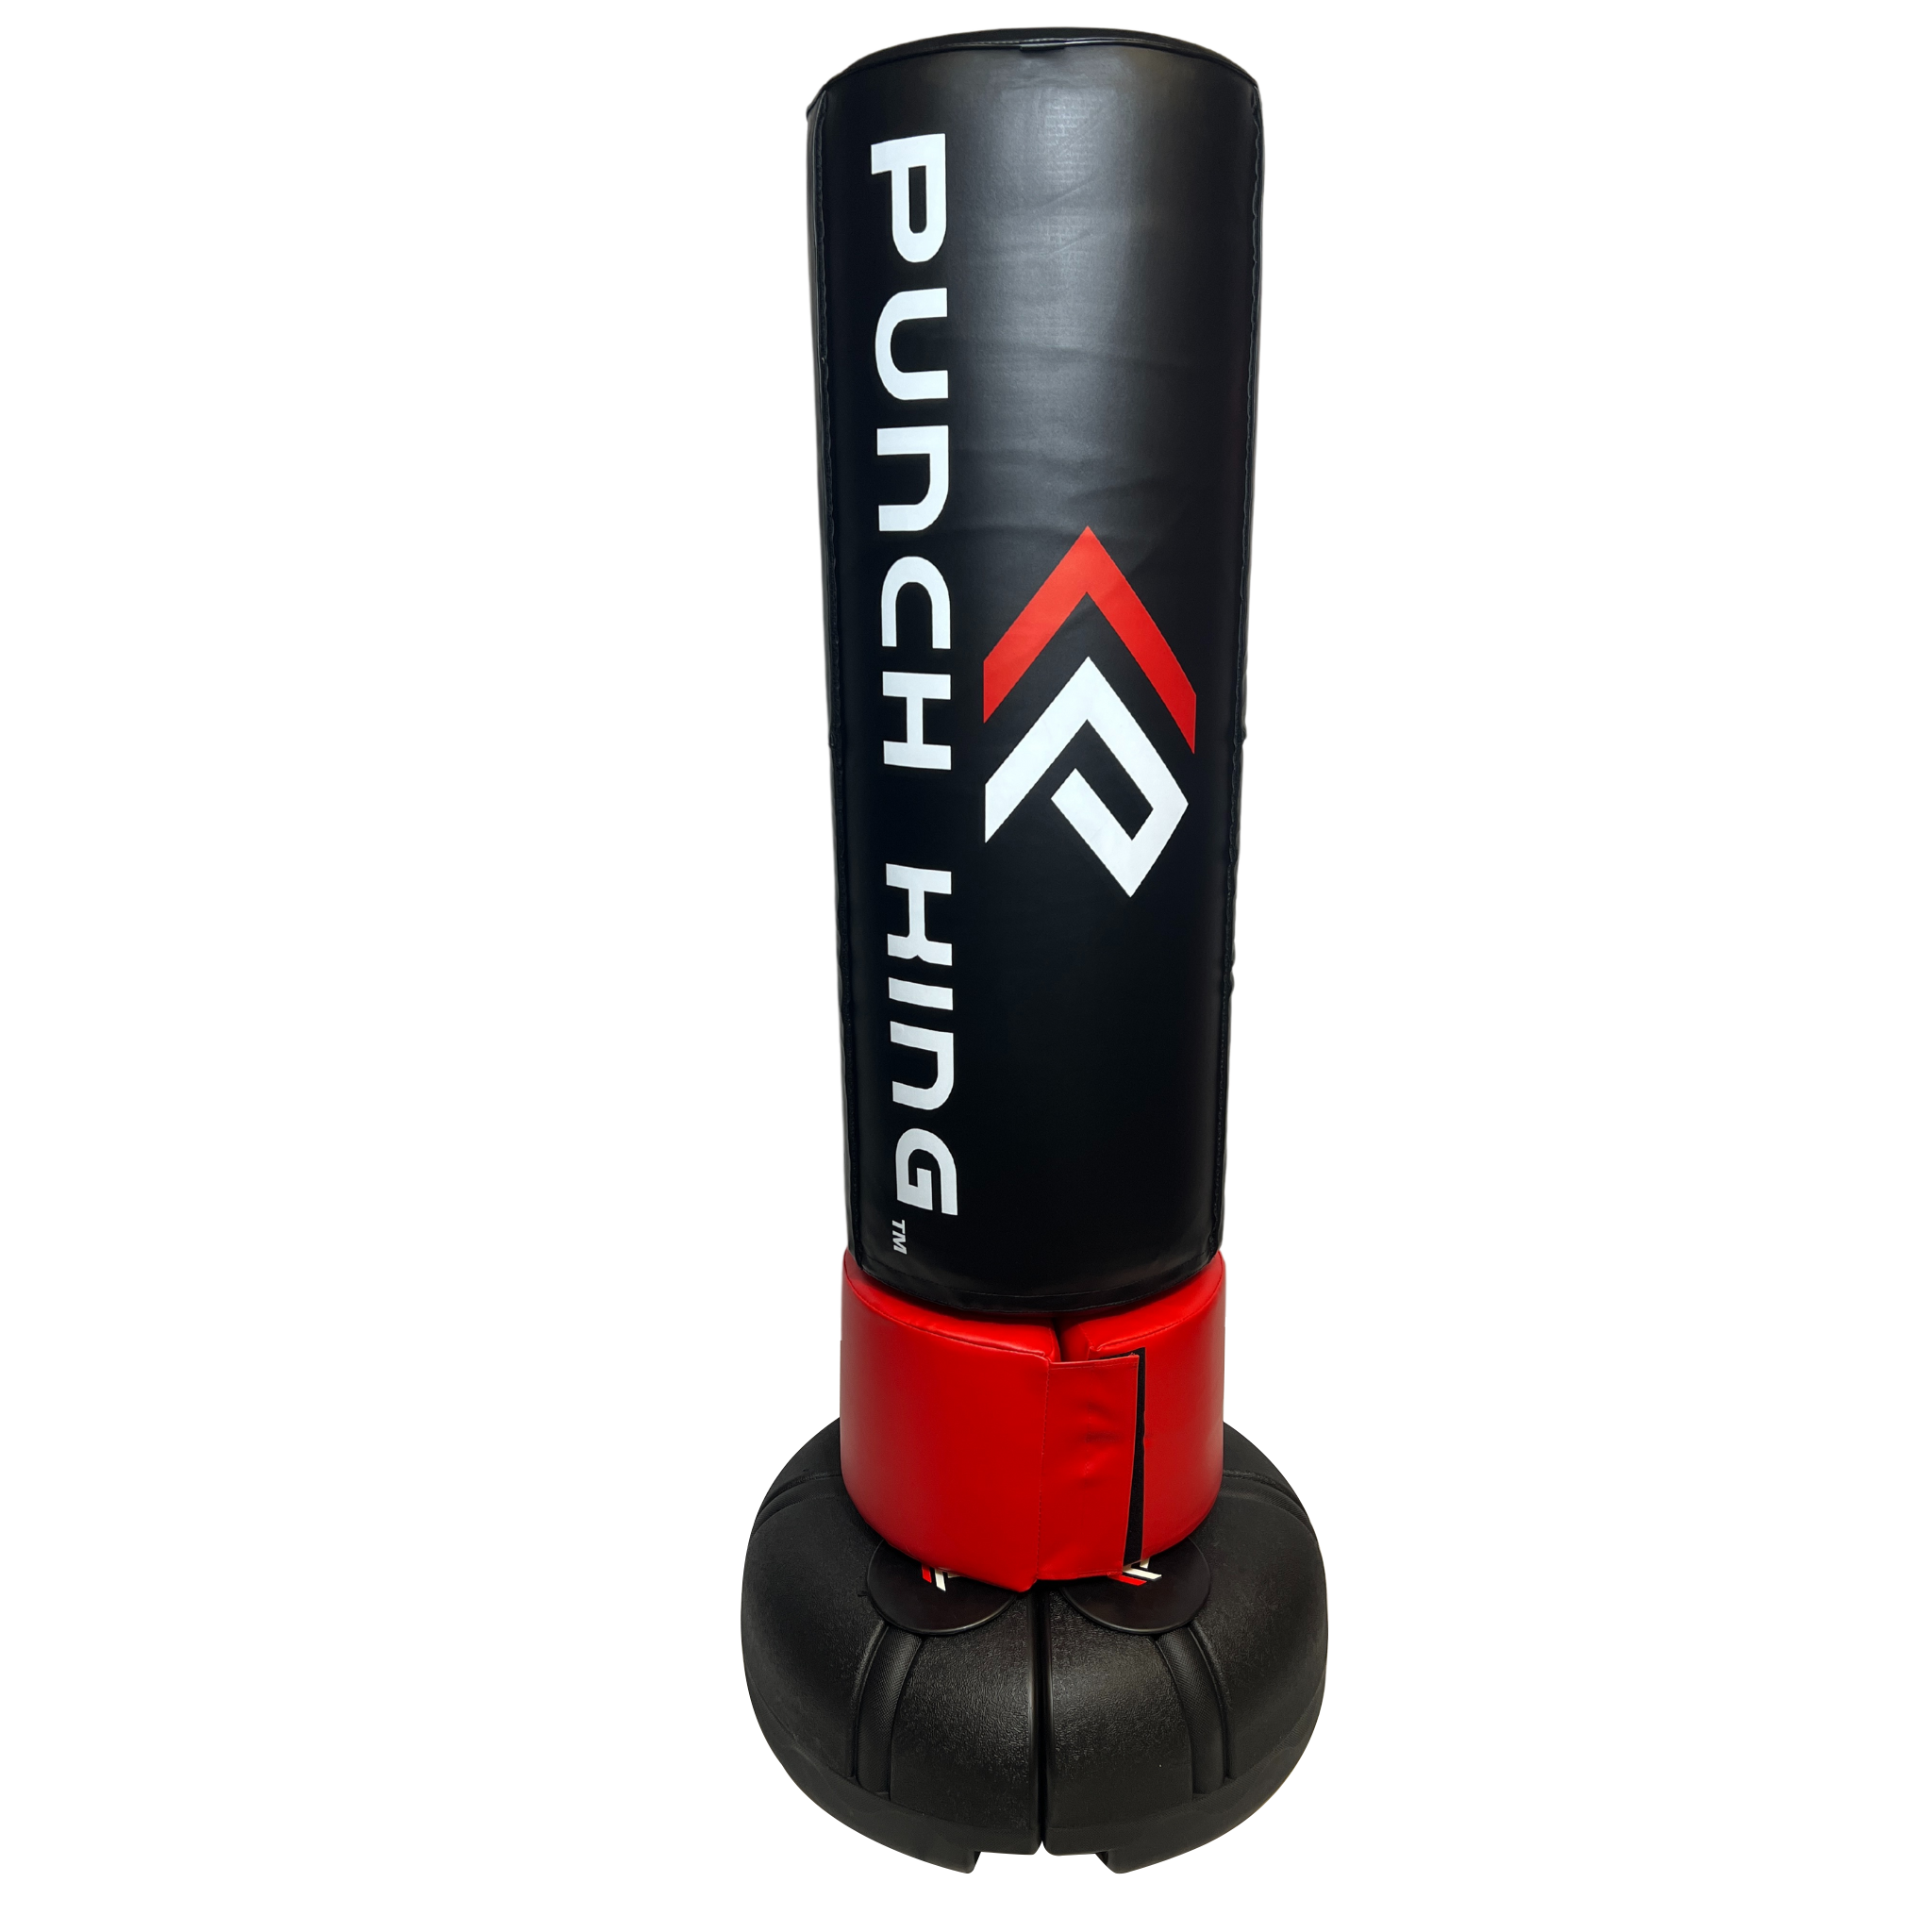 The NEW Freestanding 2.0  "Flow" Punching Bag